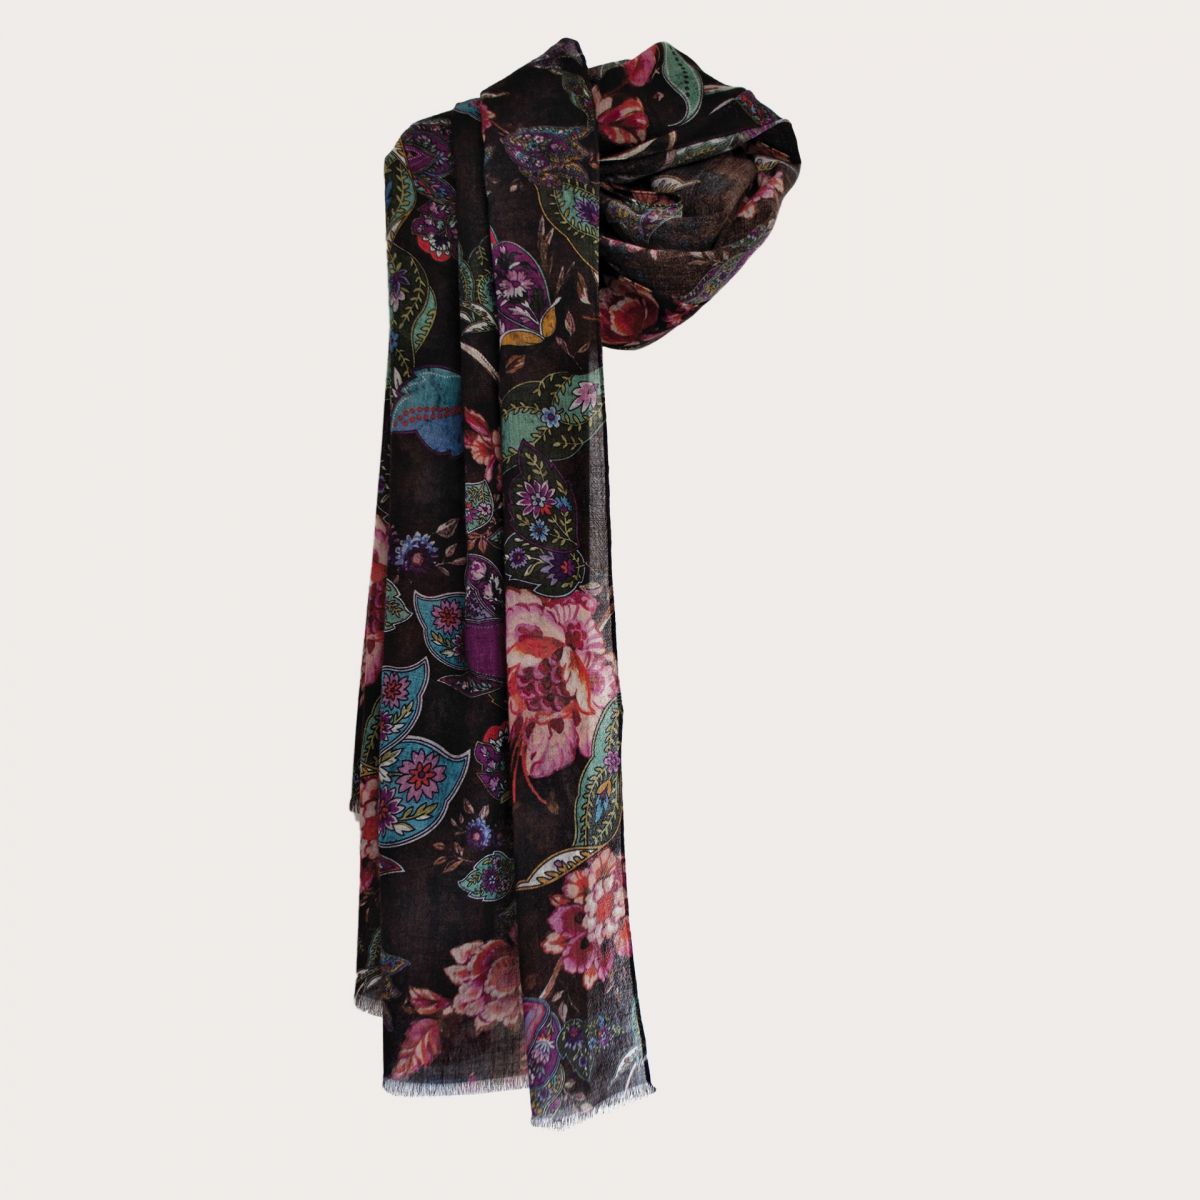 BRUCLE Light woolen scarf, paisley pattern with flowers